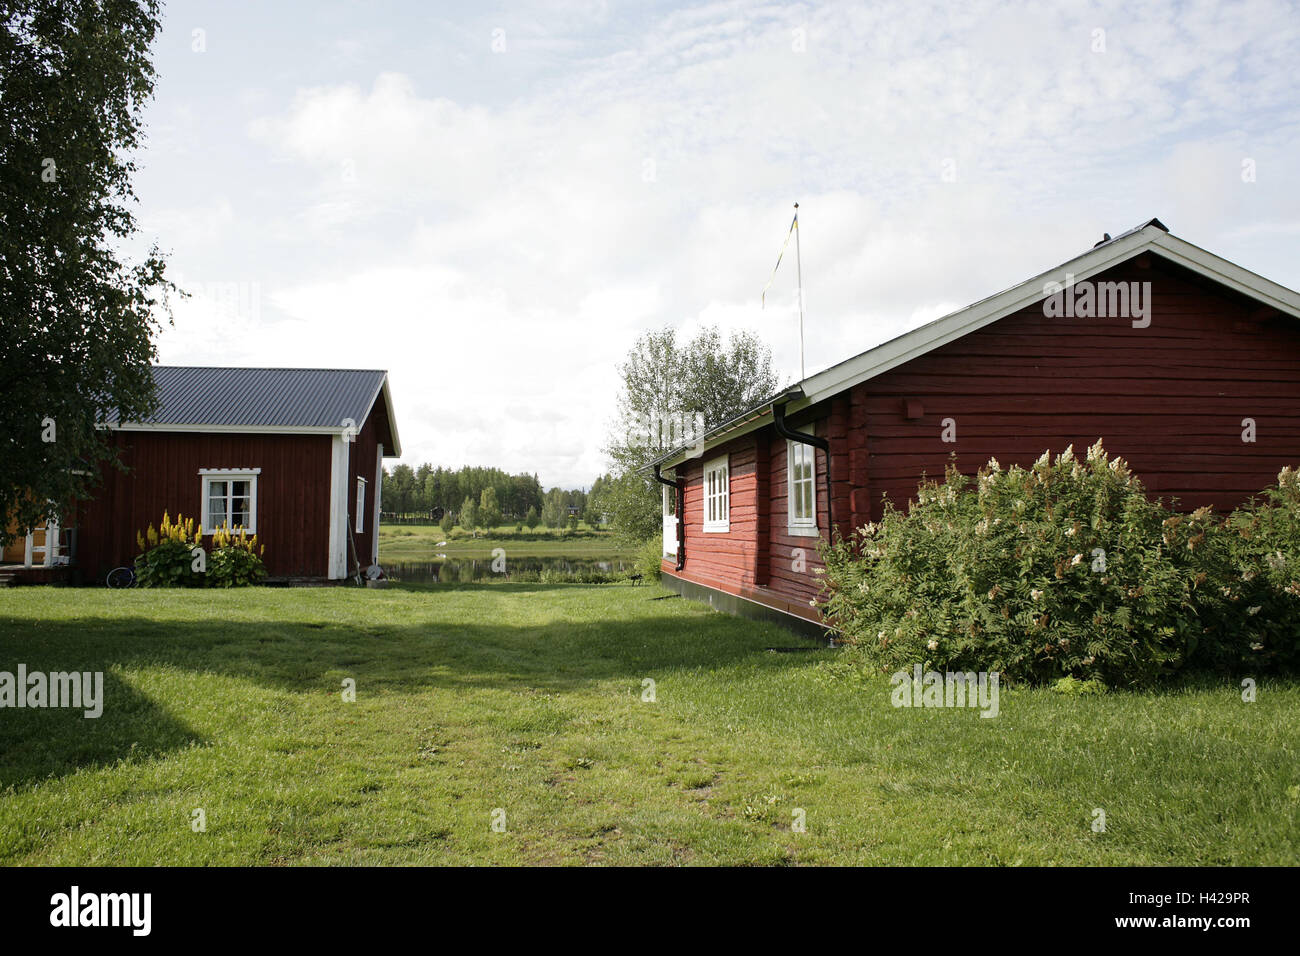 Sweden, Norrland, Norrbotten, riverside, timber houses, Scandinavia, polar circle, river, meadows, rurally, remotely, shrubs, houses, timber-frame construction way, architecture, typically, typically for country, deserted, neighborhood, red, Stock Photo